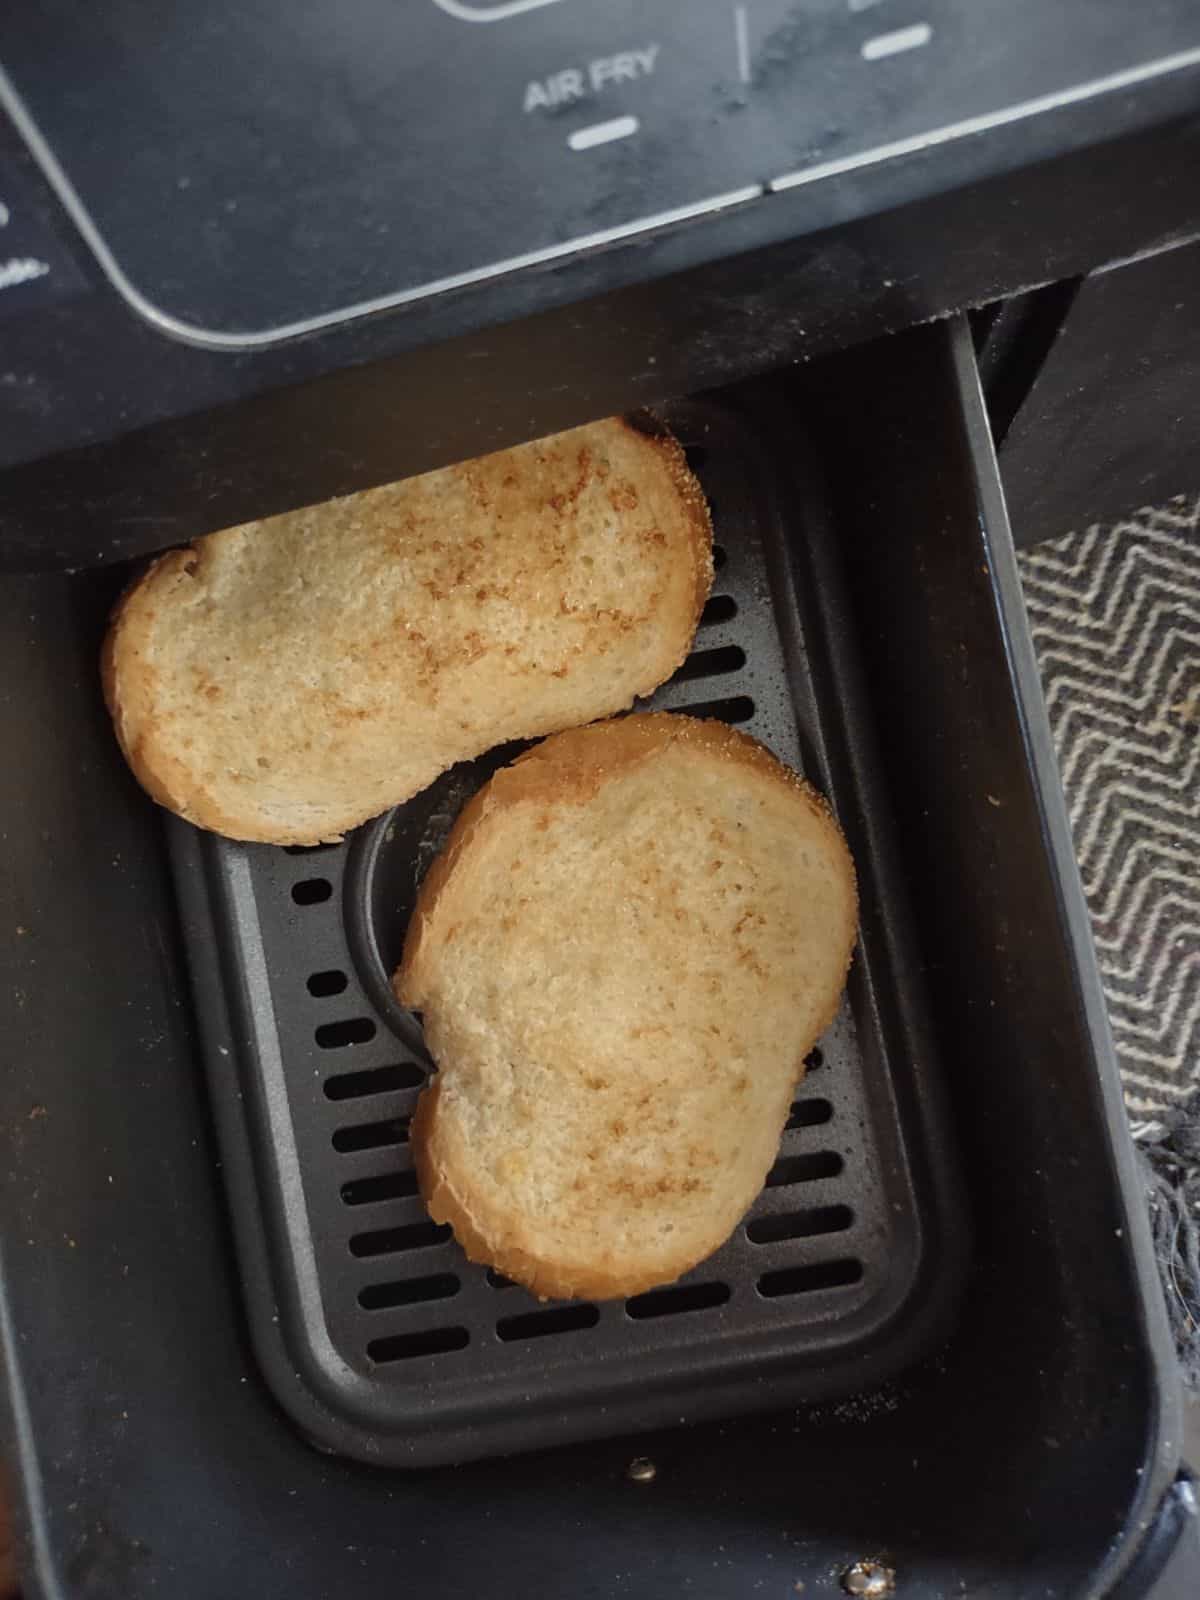 Ninji Foodi air fryer basket opened up with two pieces of garlic bread inside.